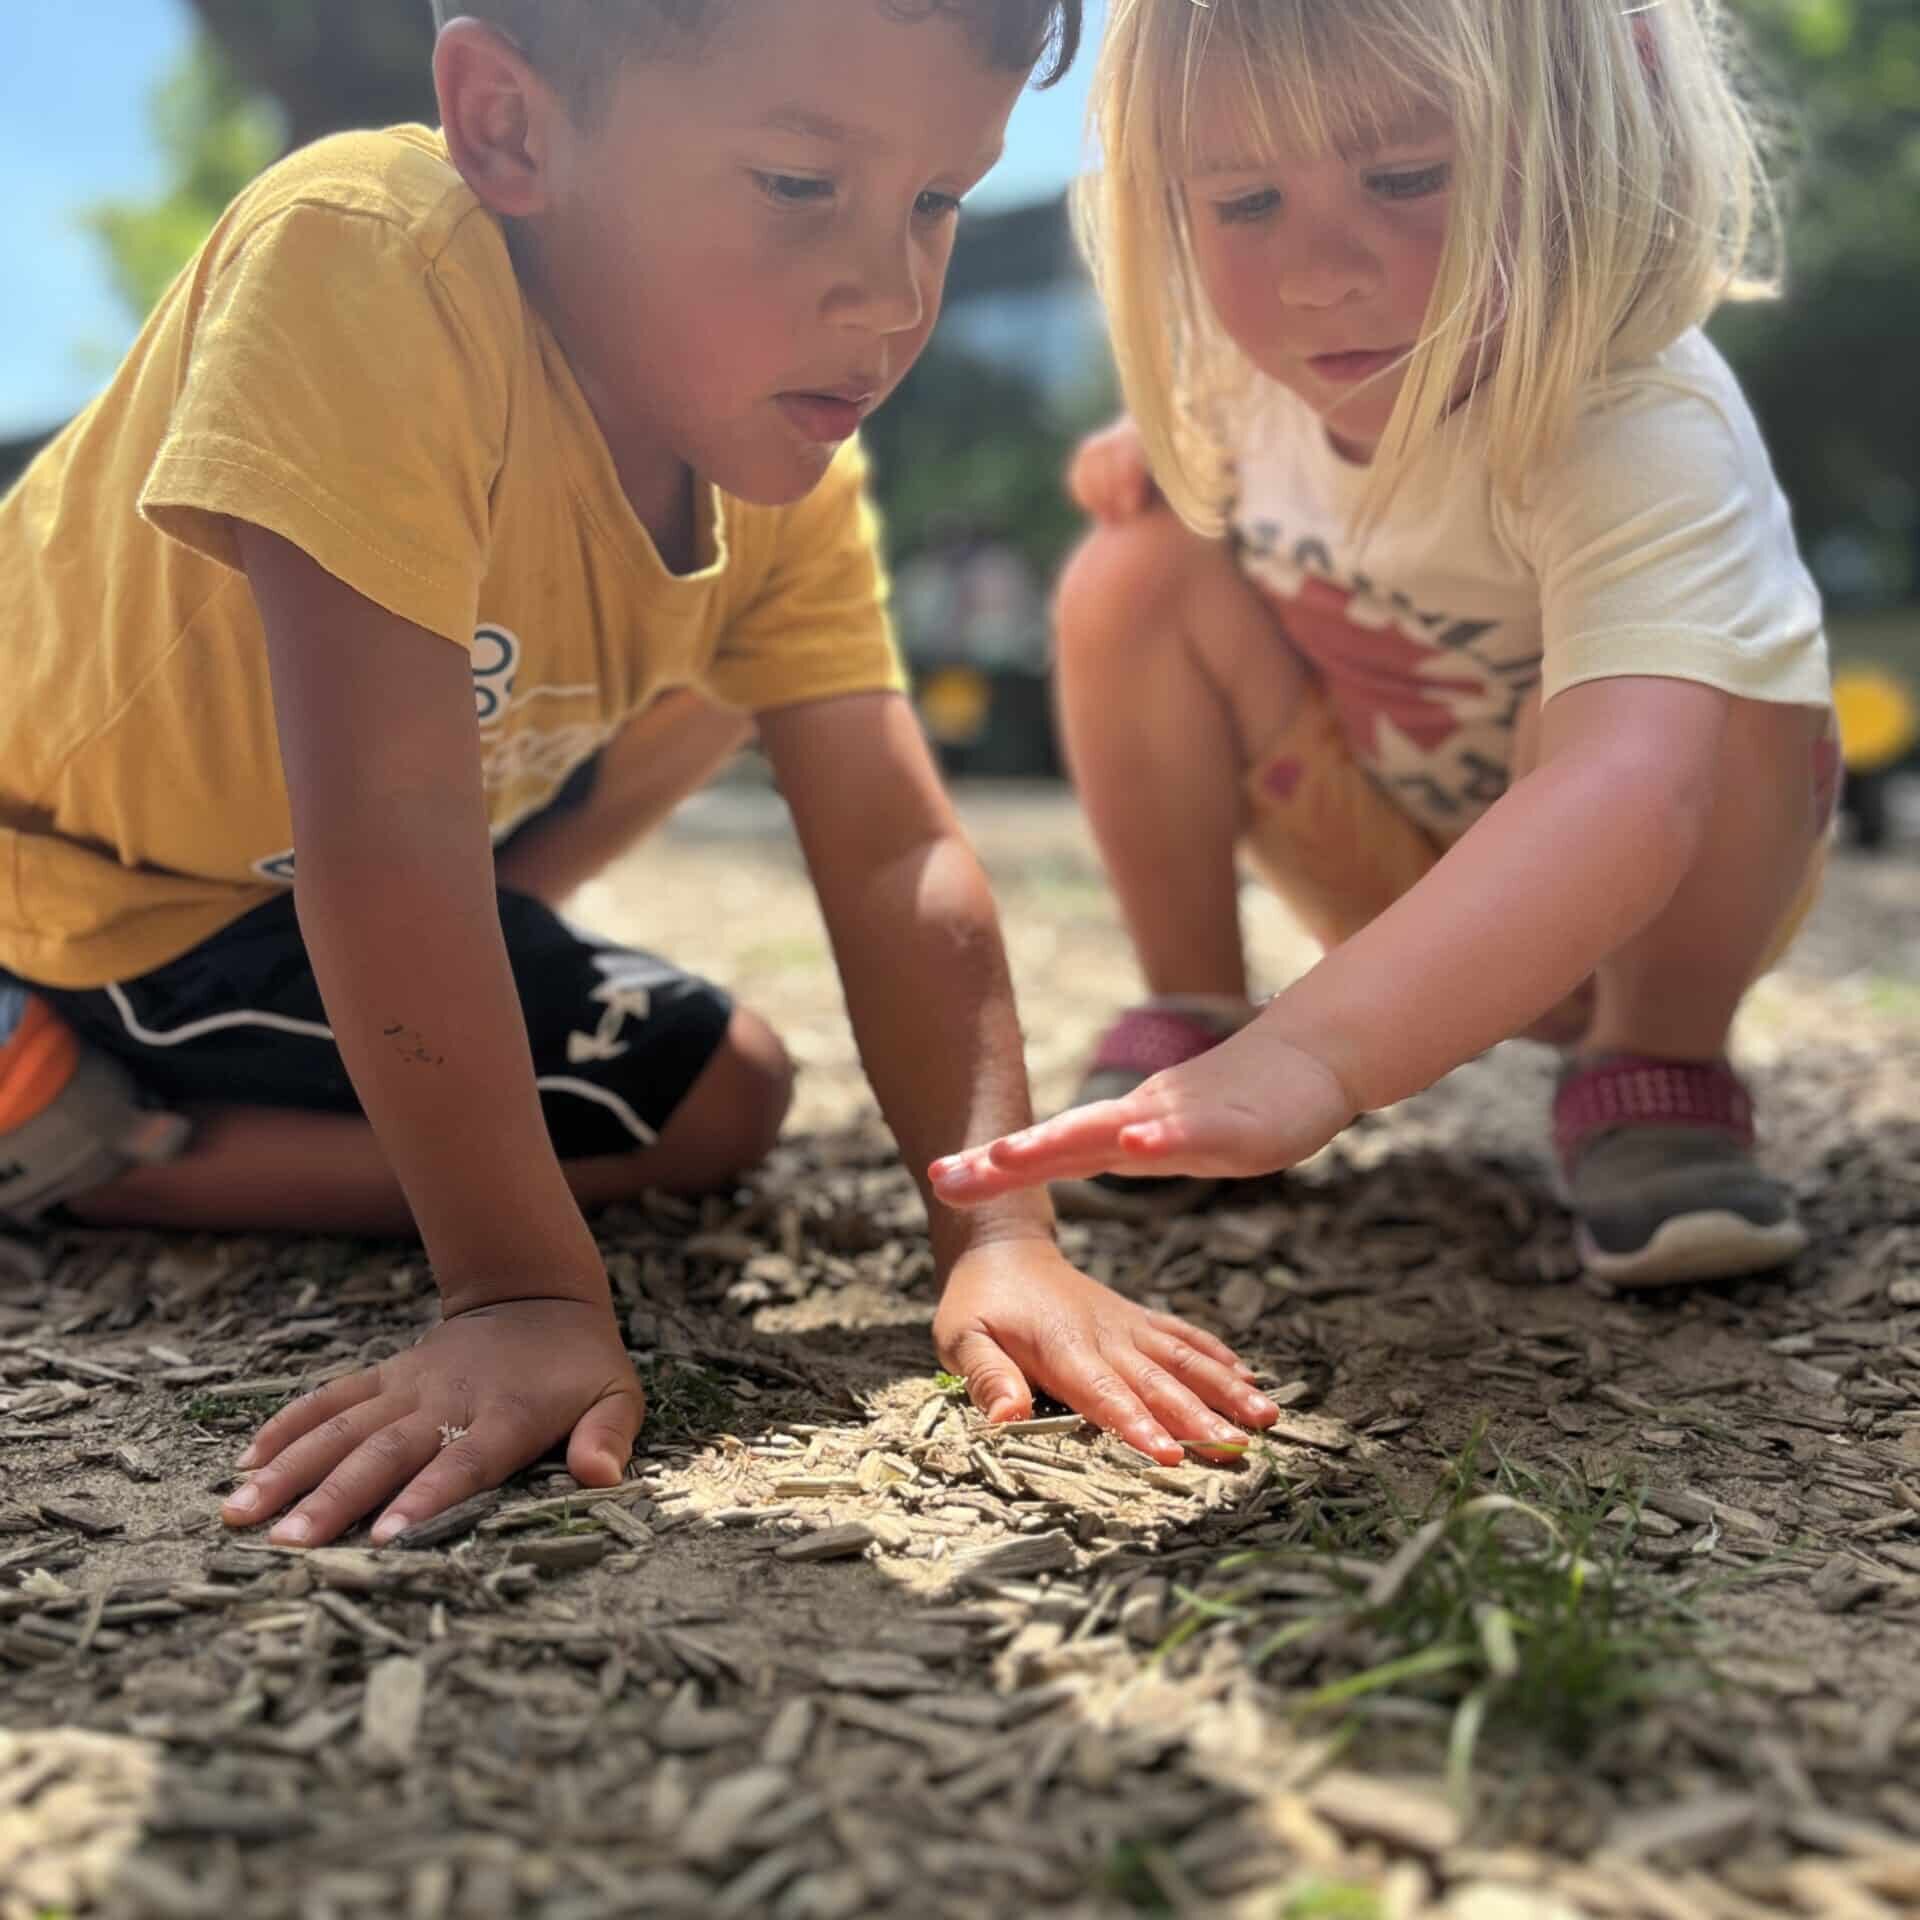 young boy and girl playing in dirt